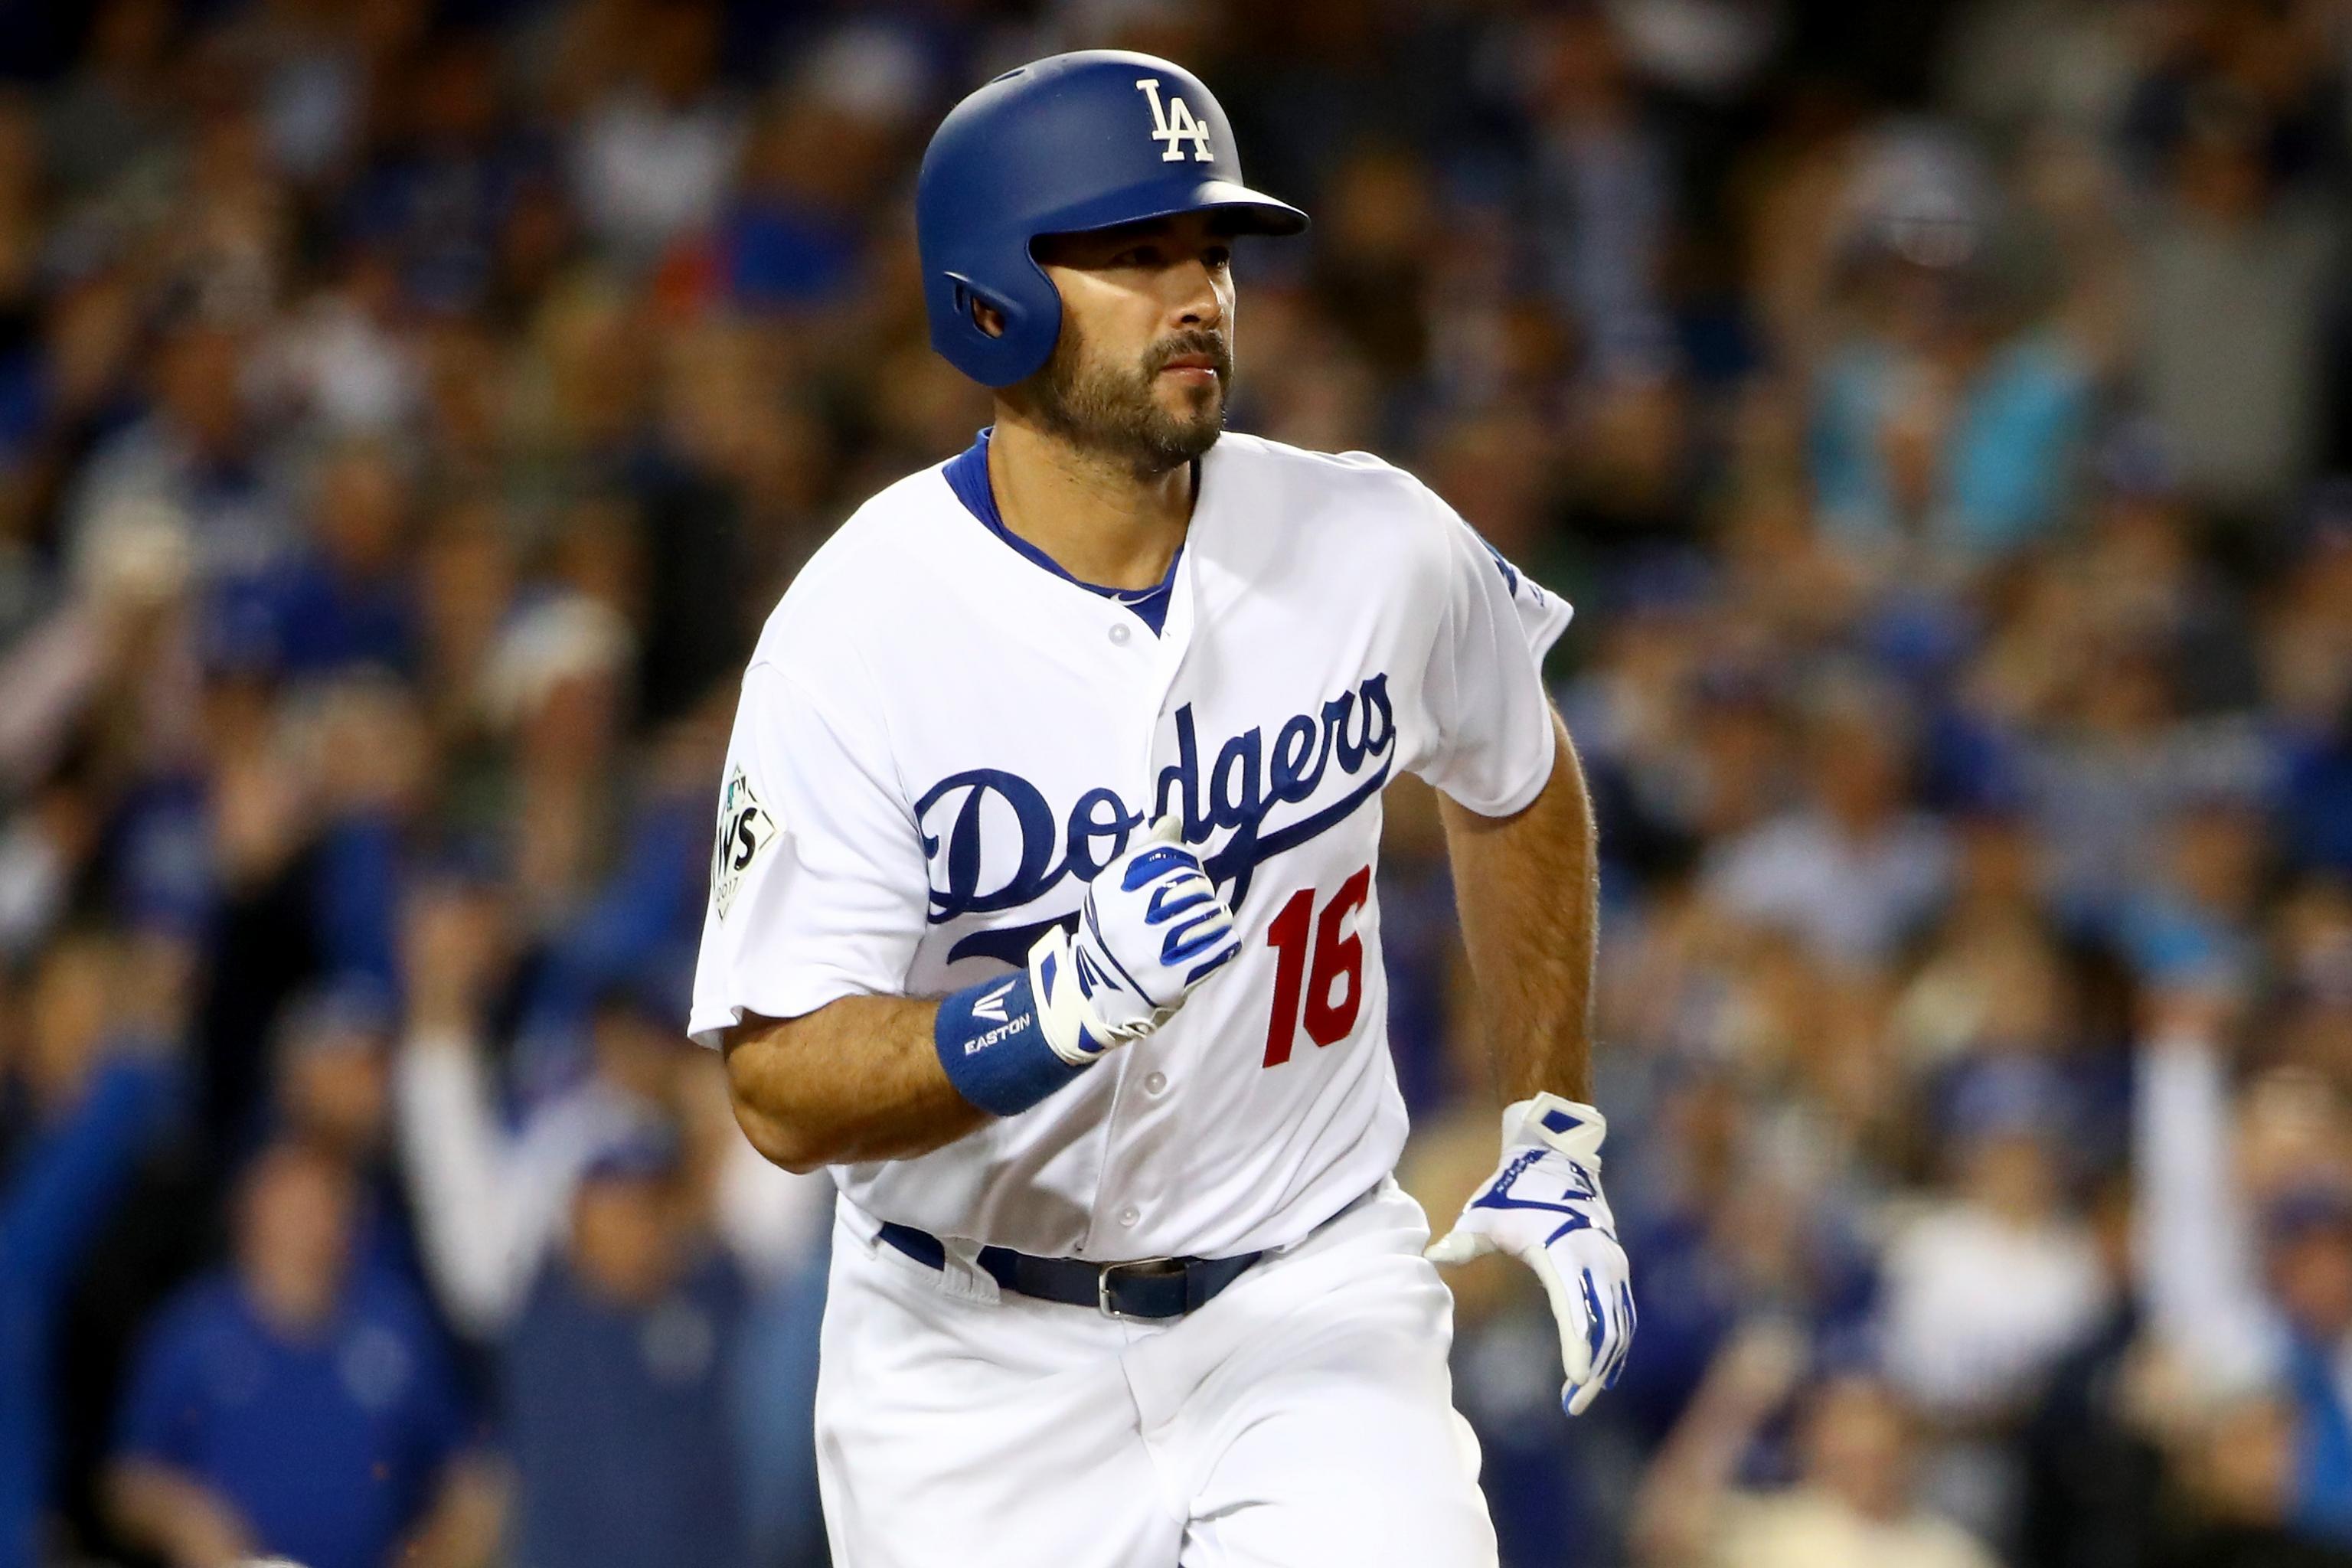 Former Dodgers Outfielder Andre Ethier Humbled By 'Big Honor' With